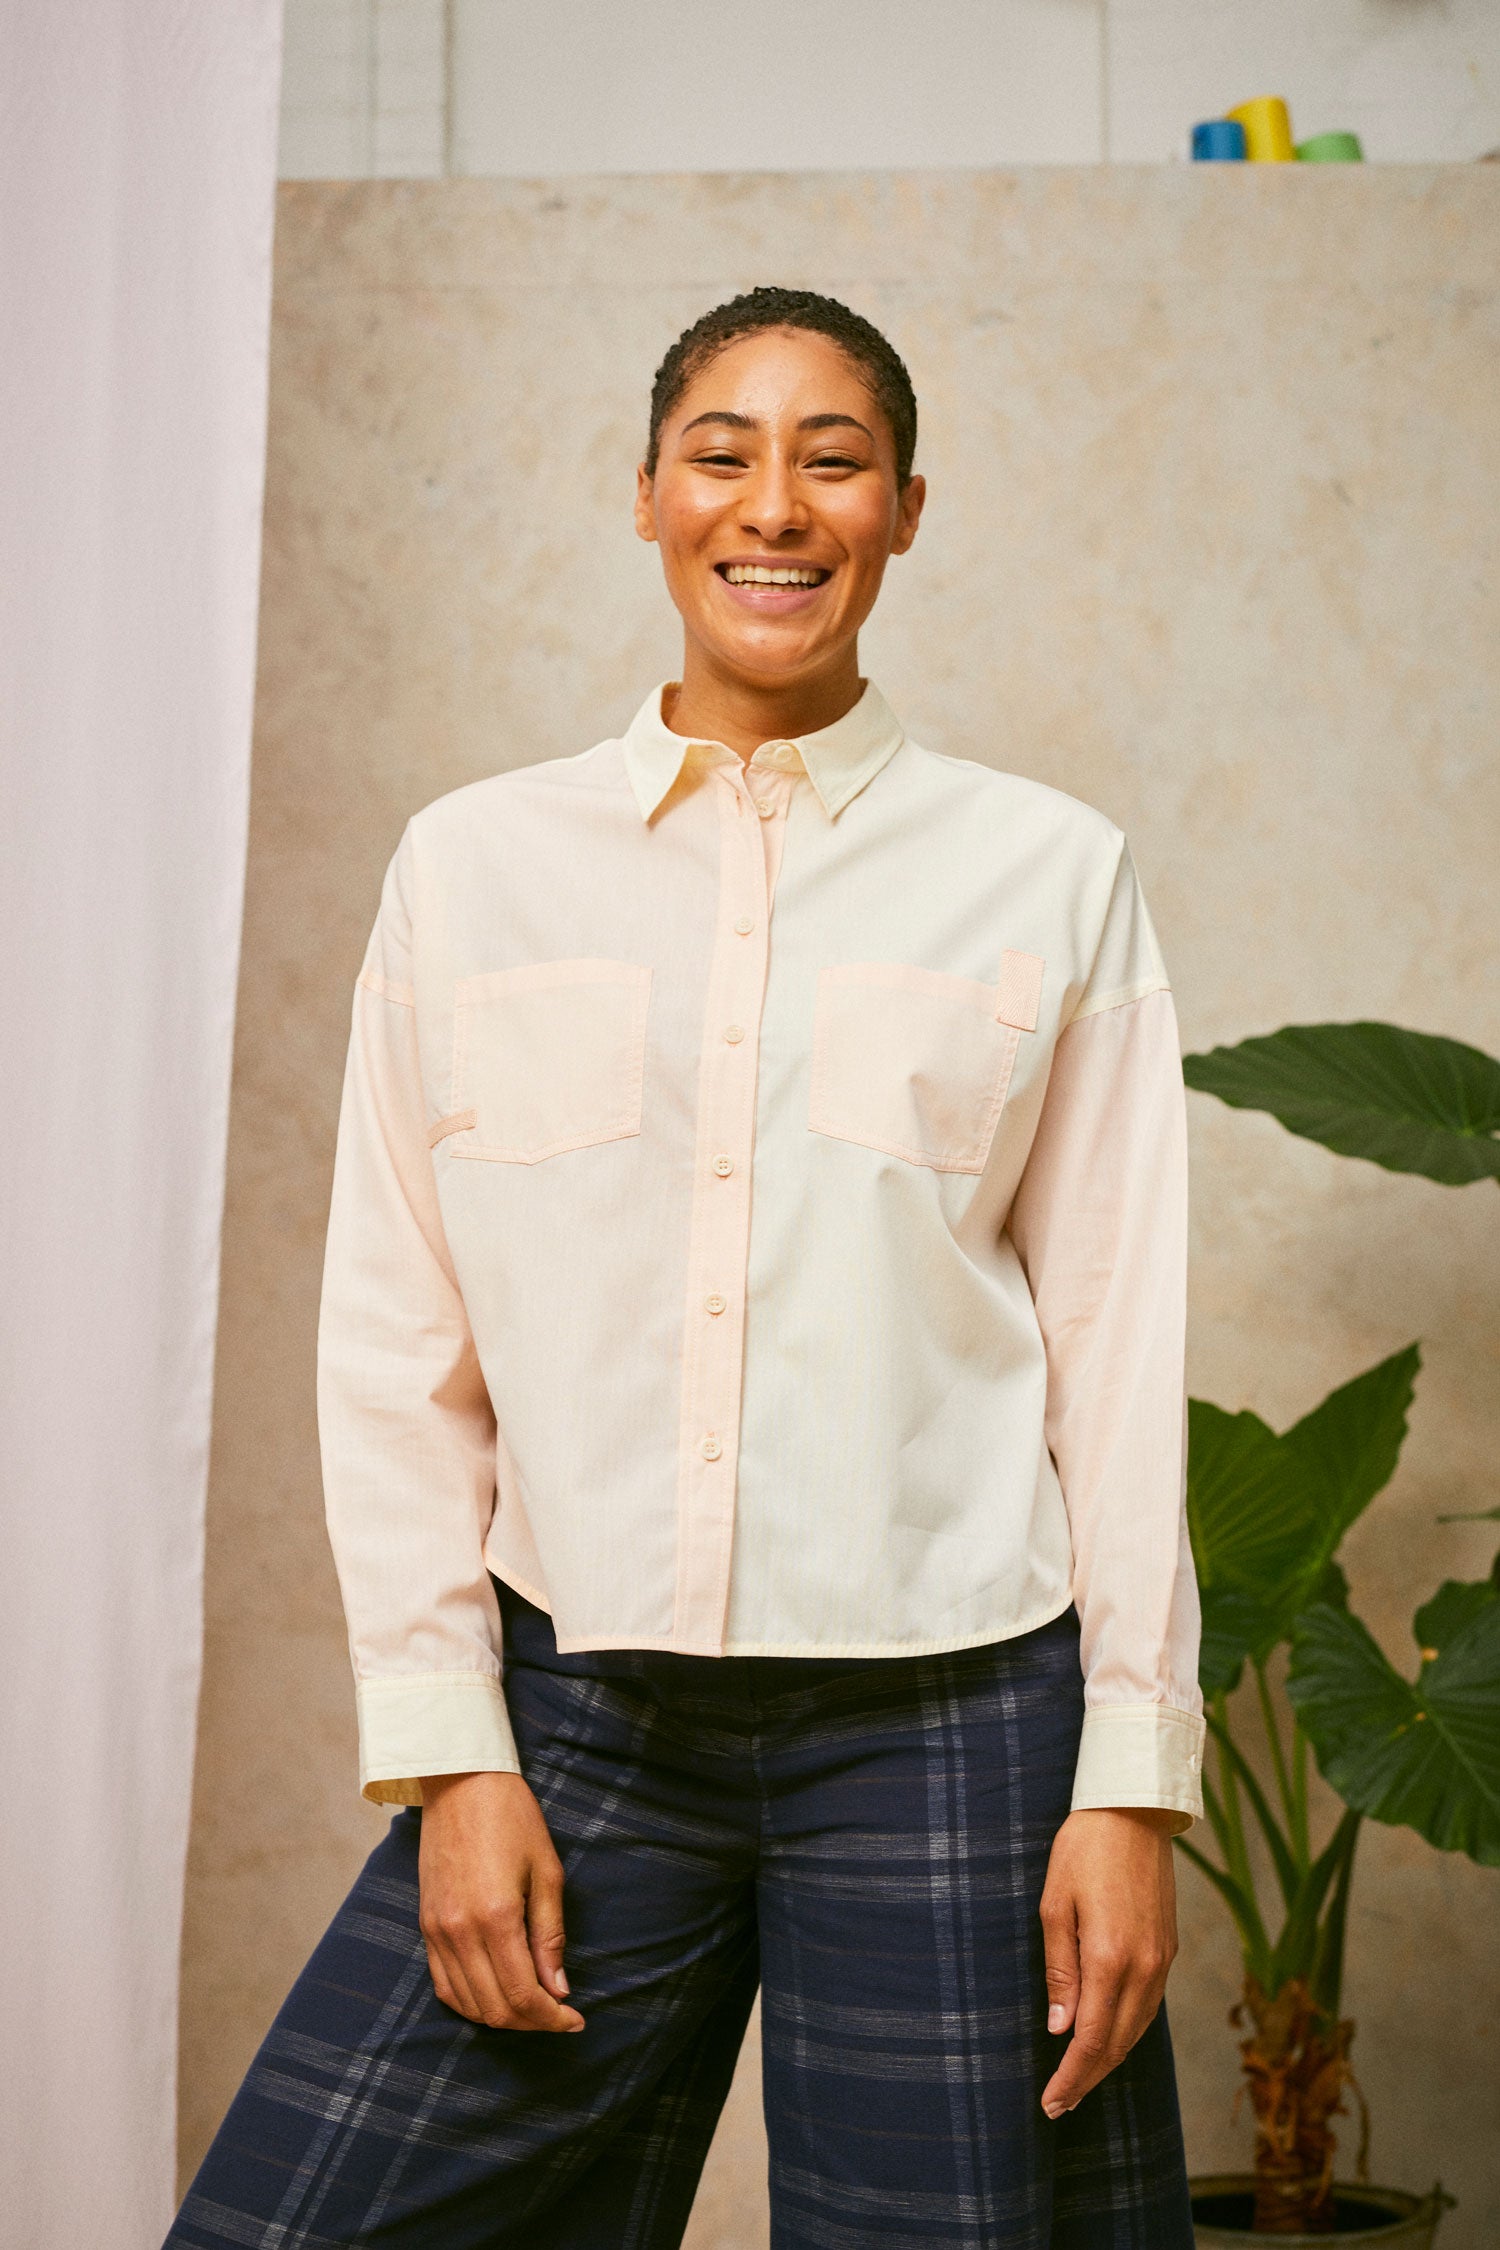 Cropped upper body image of model smiling, wearing the Saywood Lela patchworkshirt in pastel orange and yellow, with patch pockets on the chest. Worn with navy check trousers. A plant can be seen in the background.